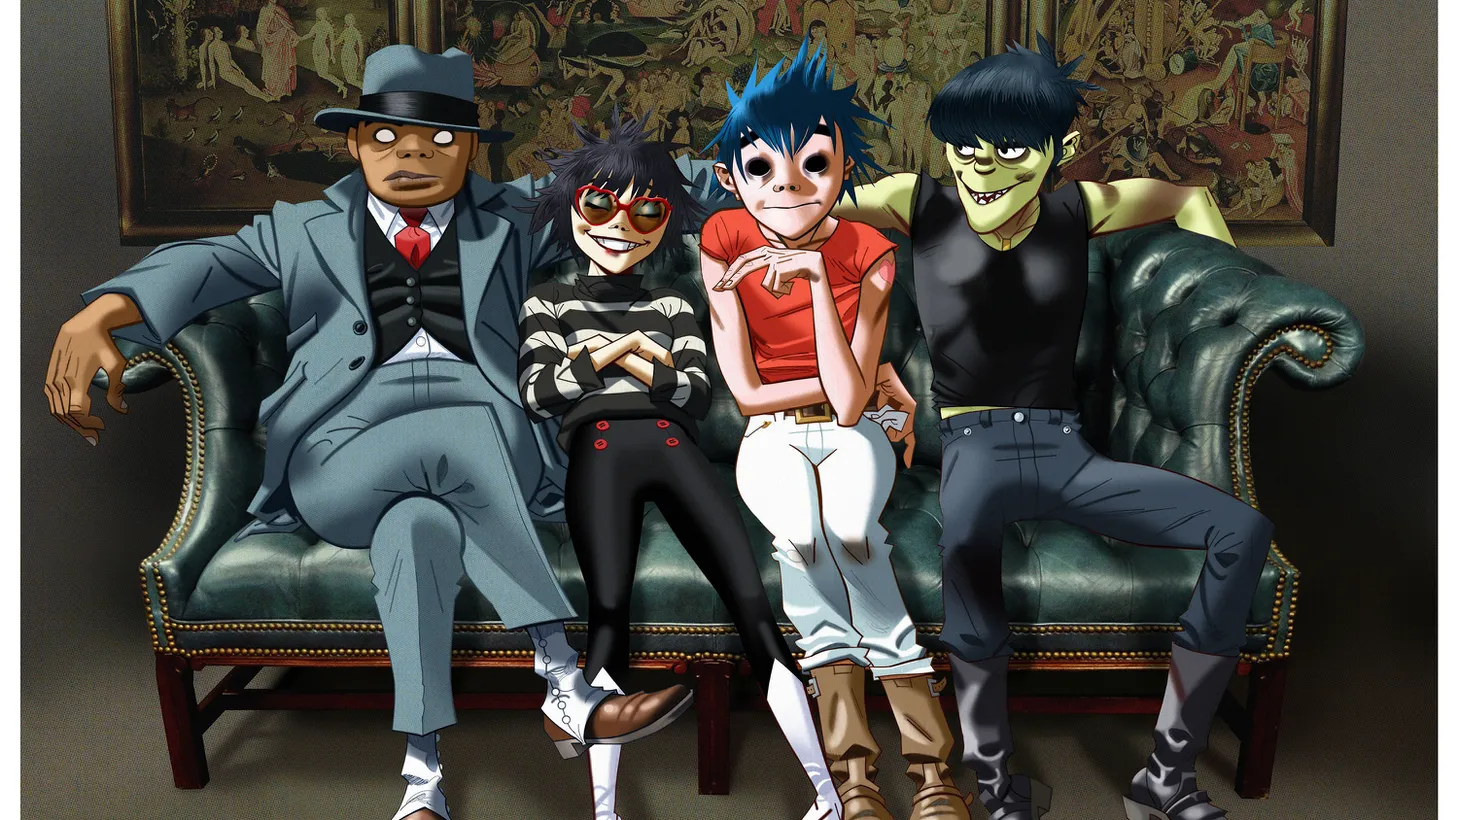 Wholesome family portrait vibes from the world’s most beloved cartoon band, Gorillaz.